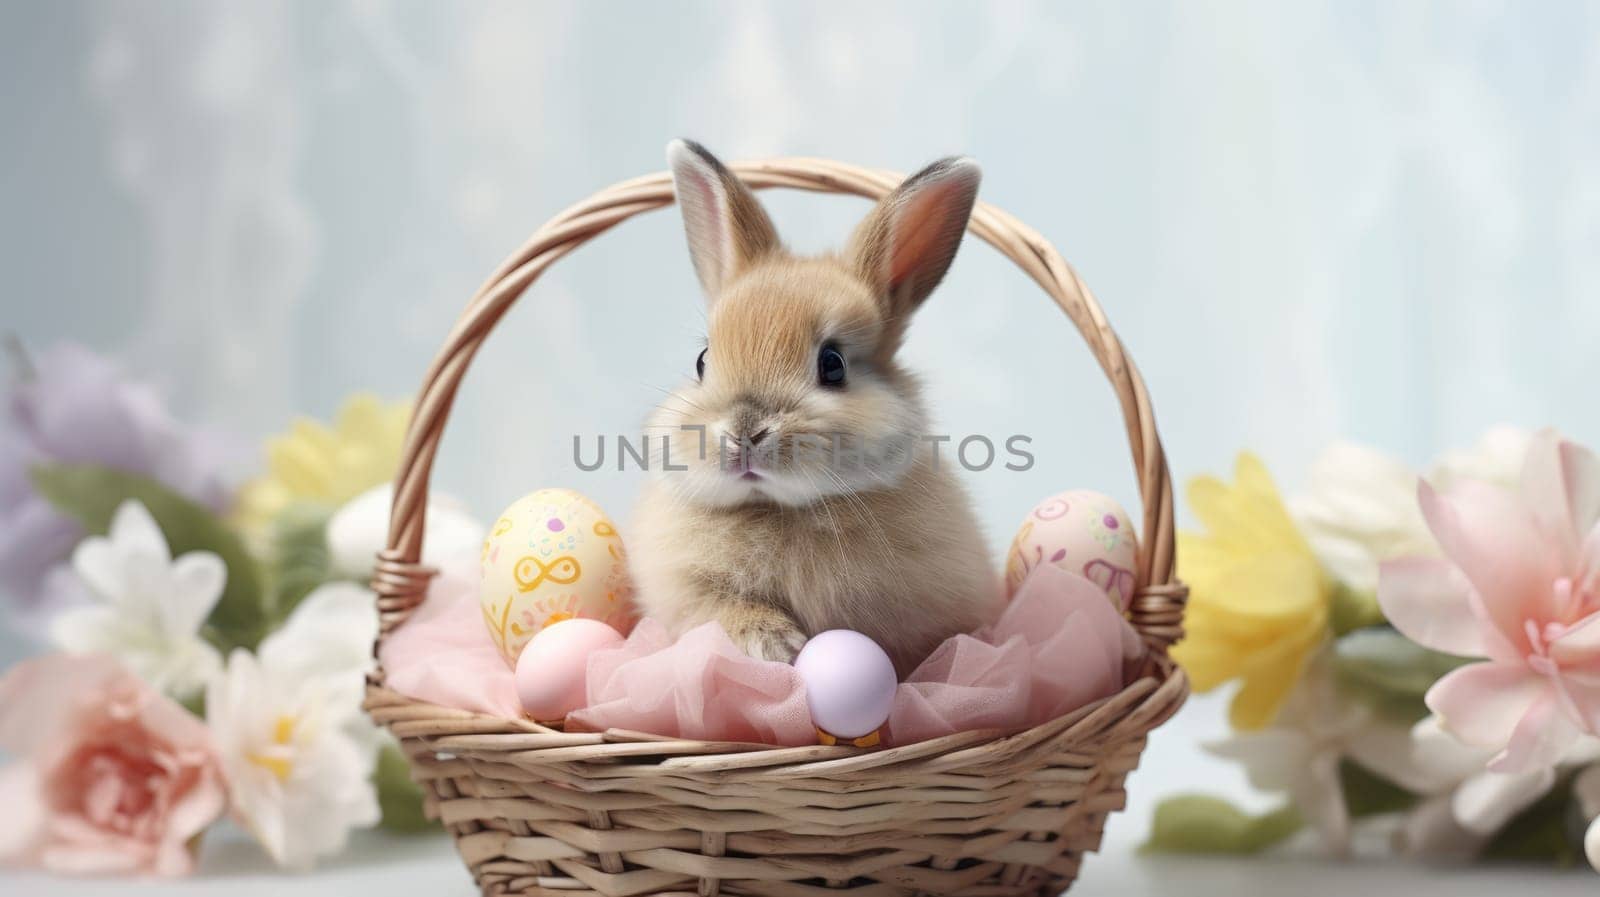 Cute fluffy rabbit in a basket full of colorful Easter eggs on a blue background by JuliaDorian